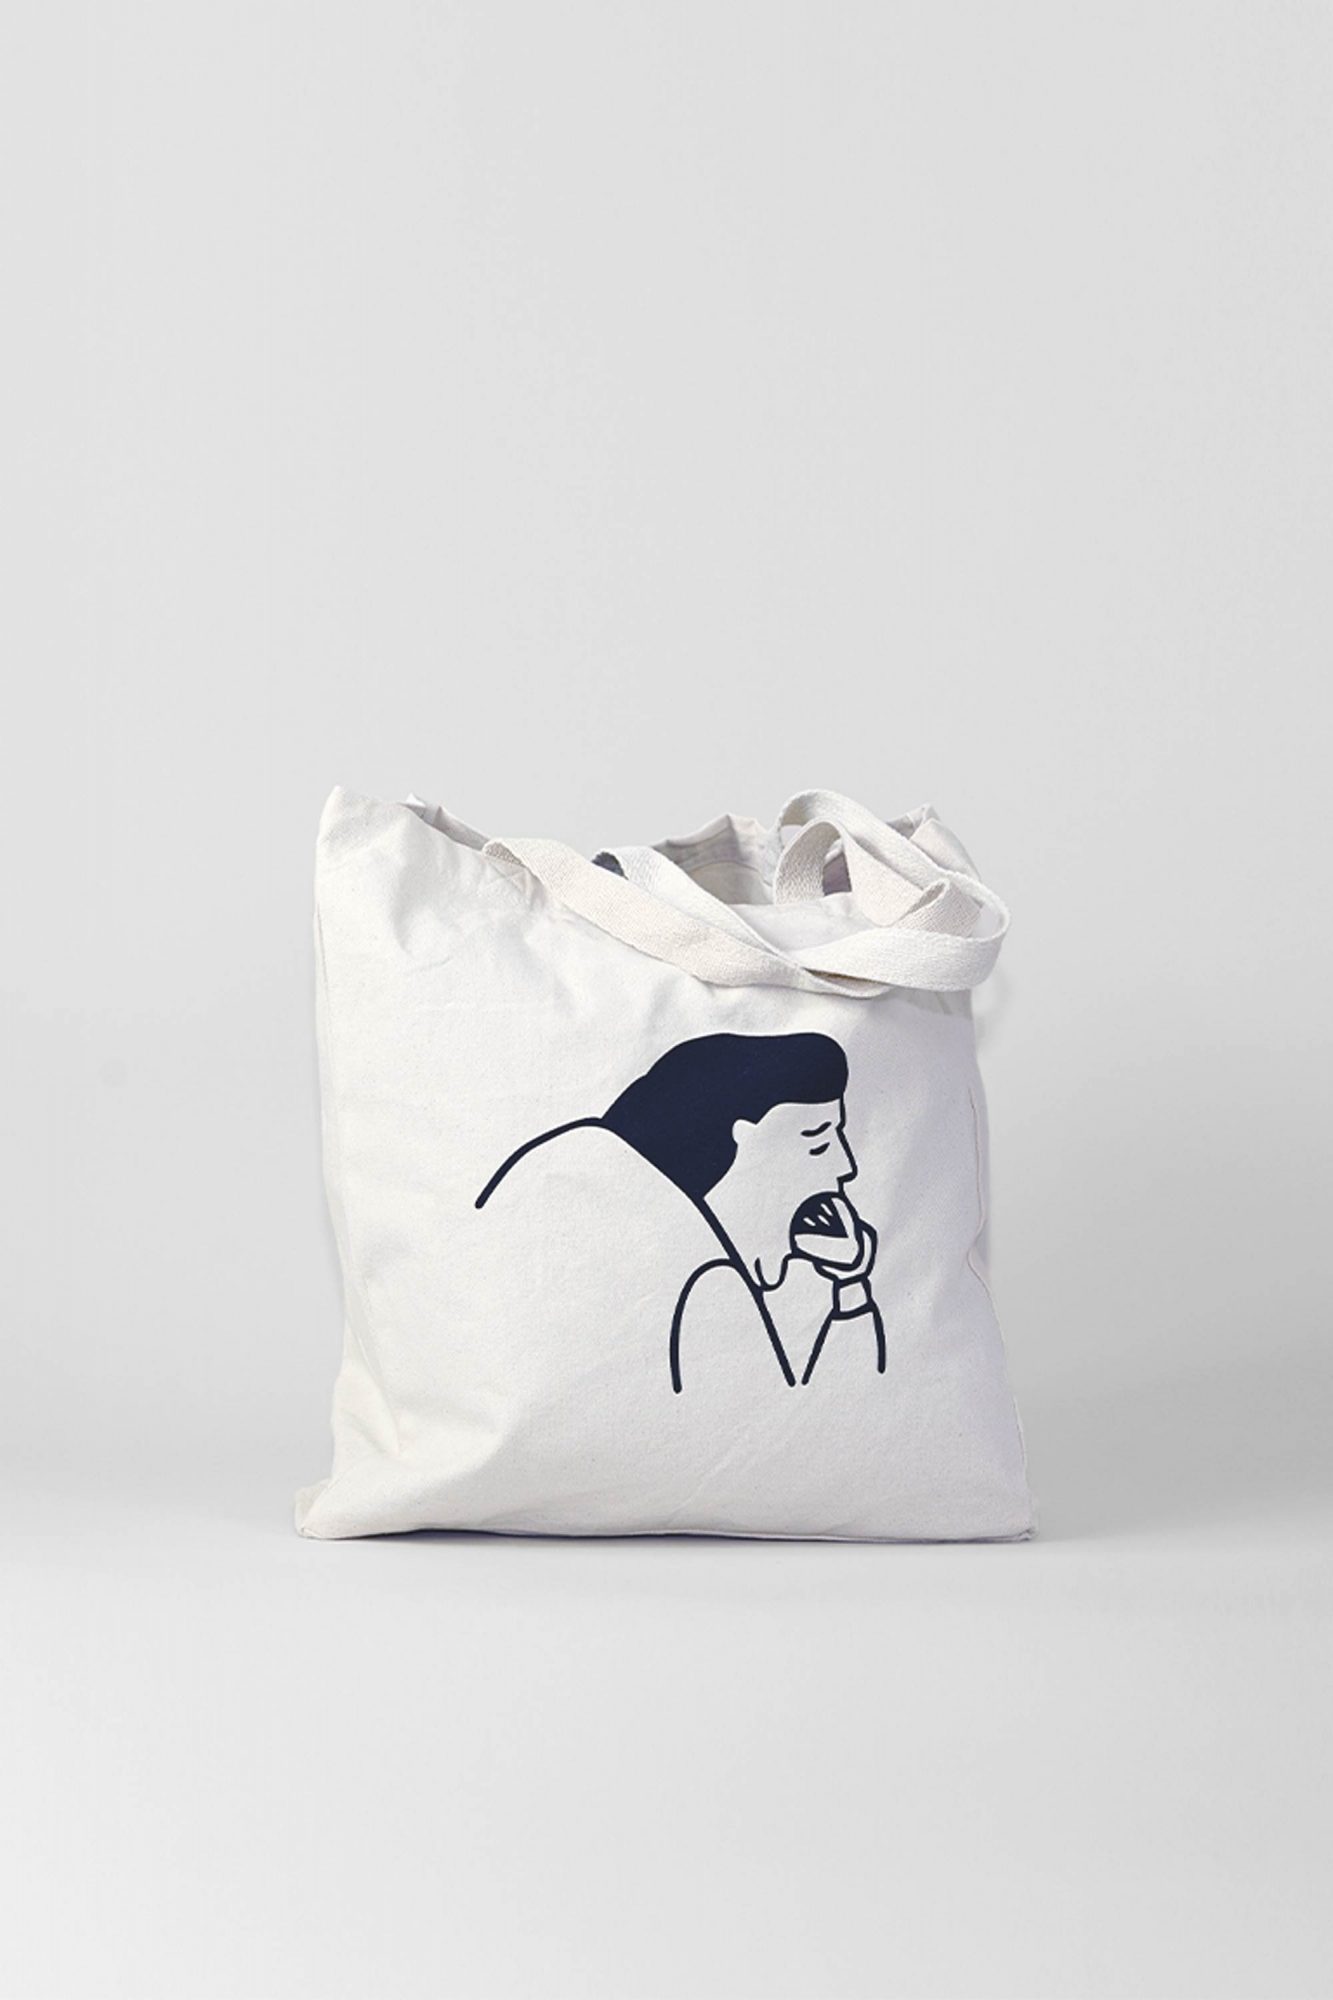 Canvas Tote Bags (White) - 100% Natural Cotton Bags